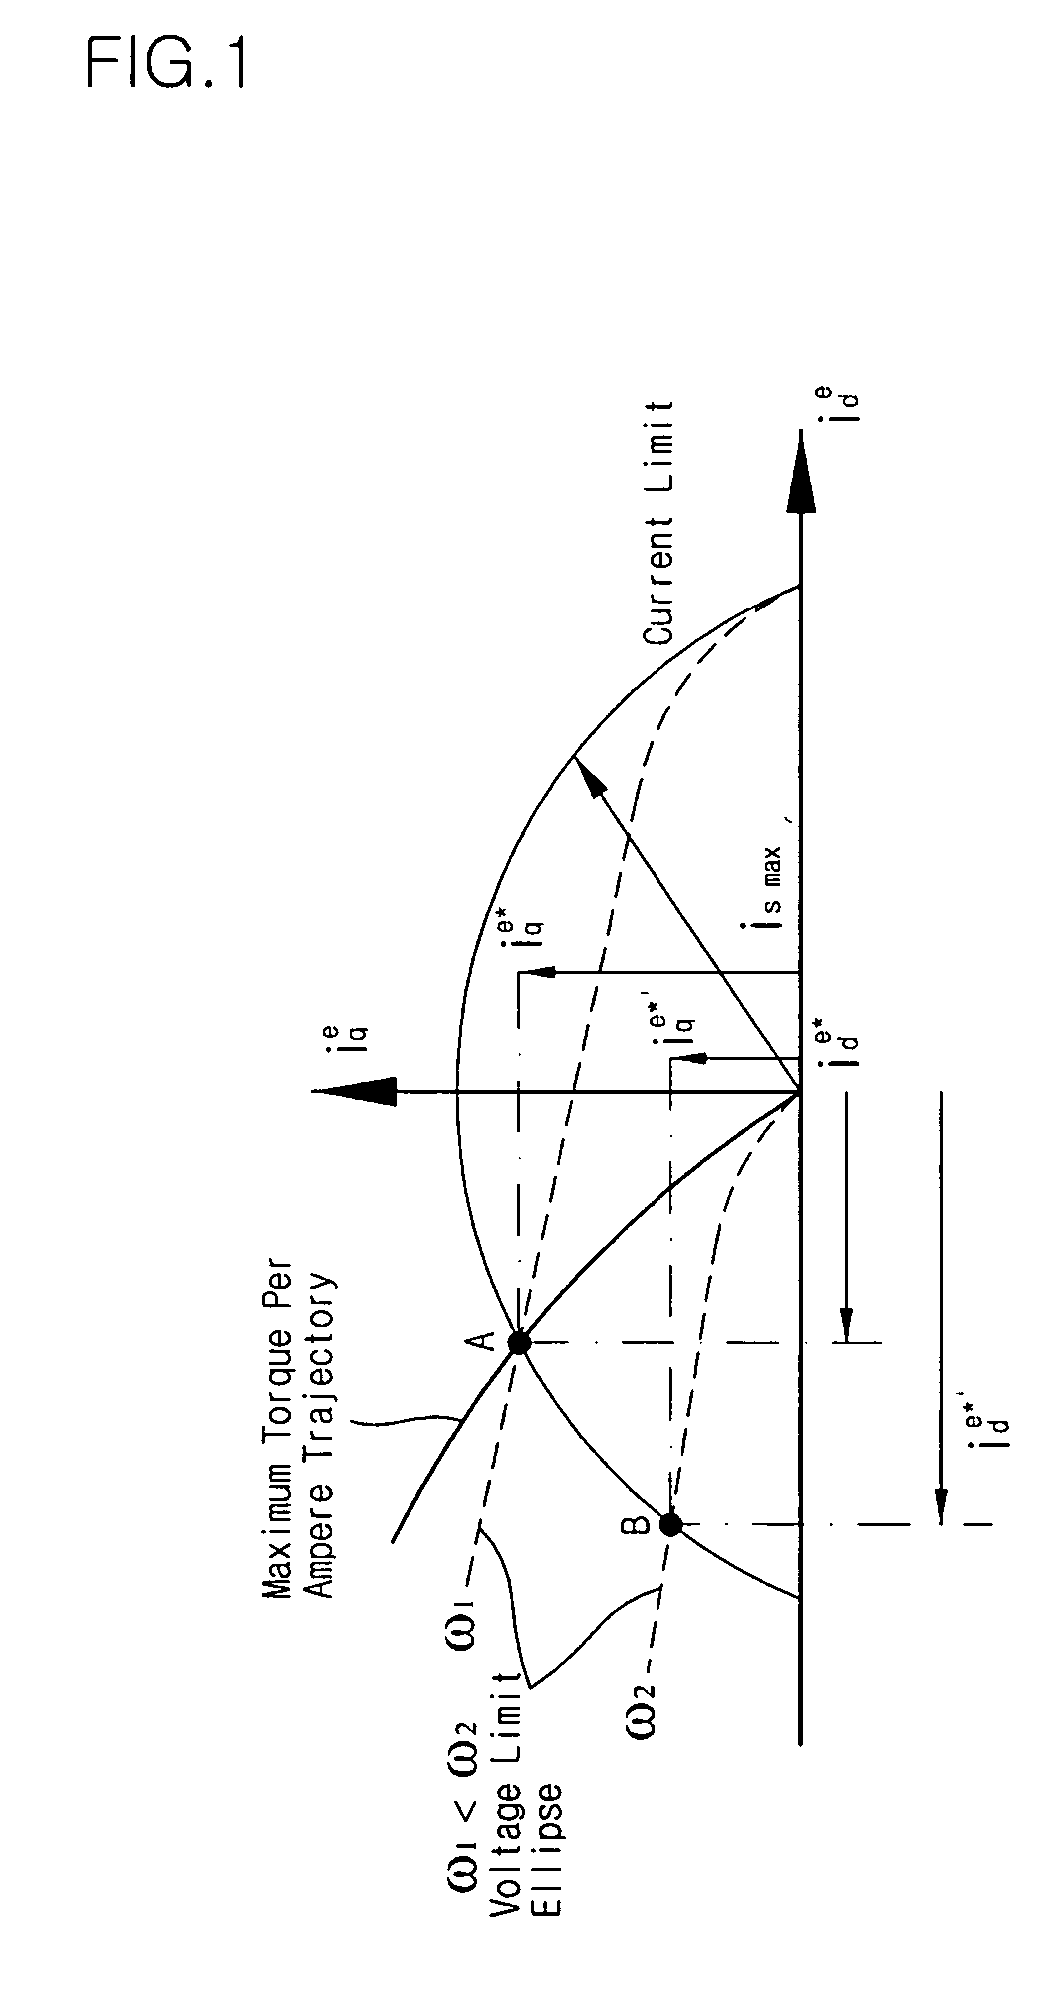 Lead-angle control method and device for operating permanent magnet synchronous motor in flux weakening regions